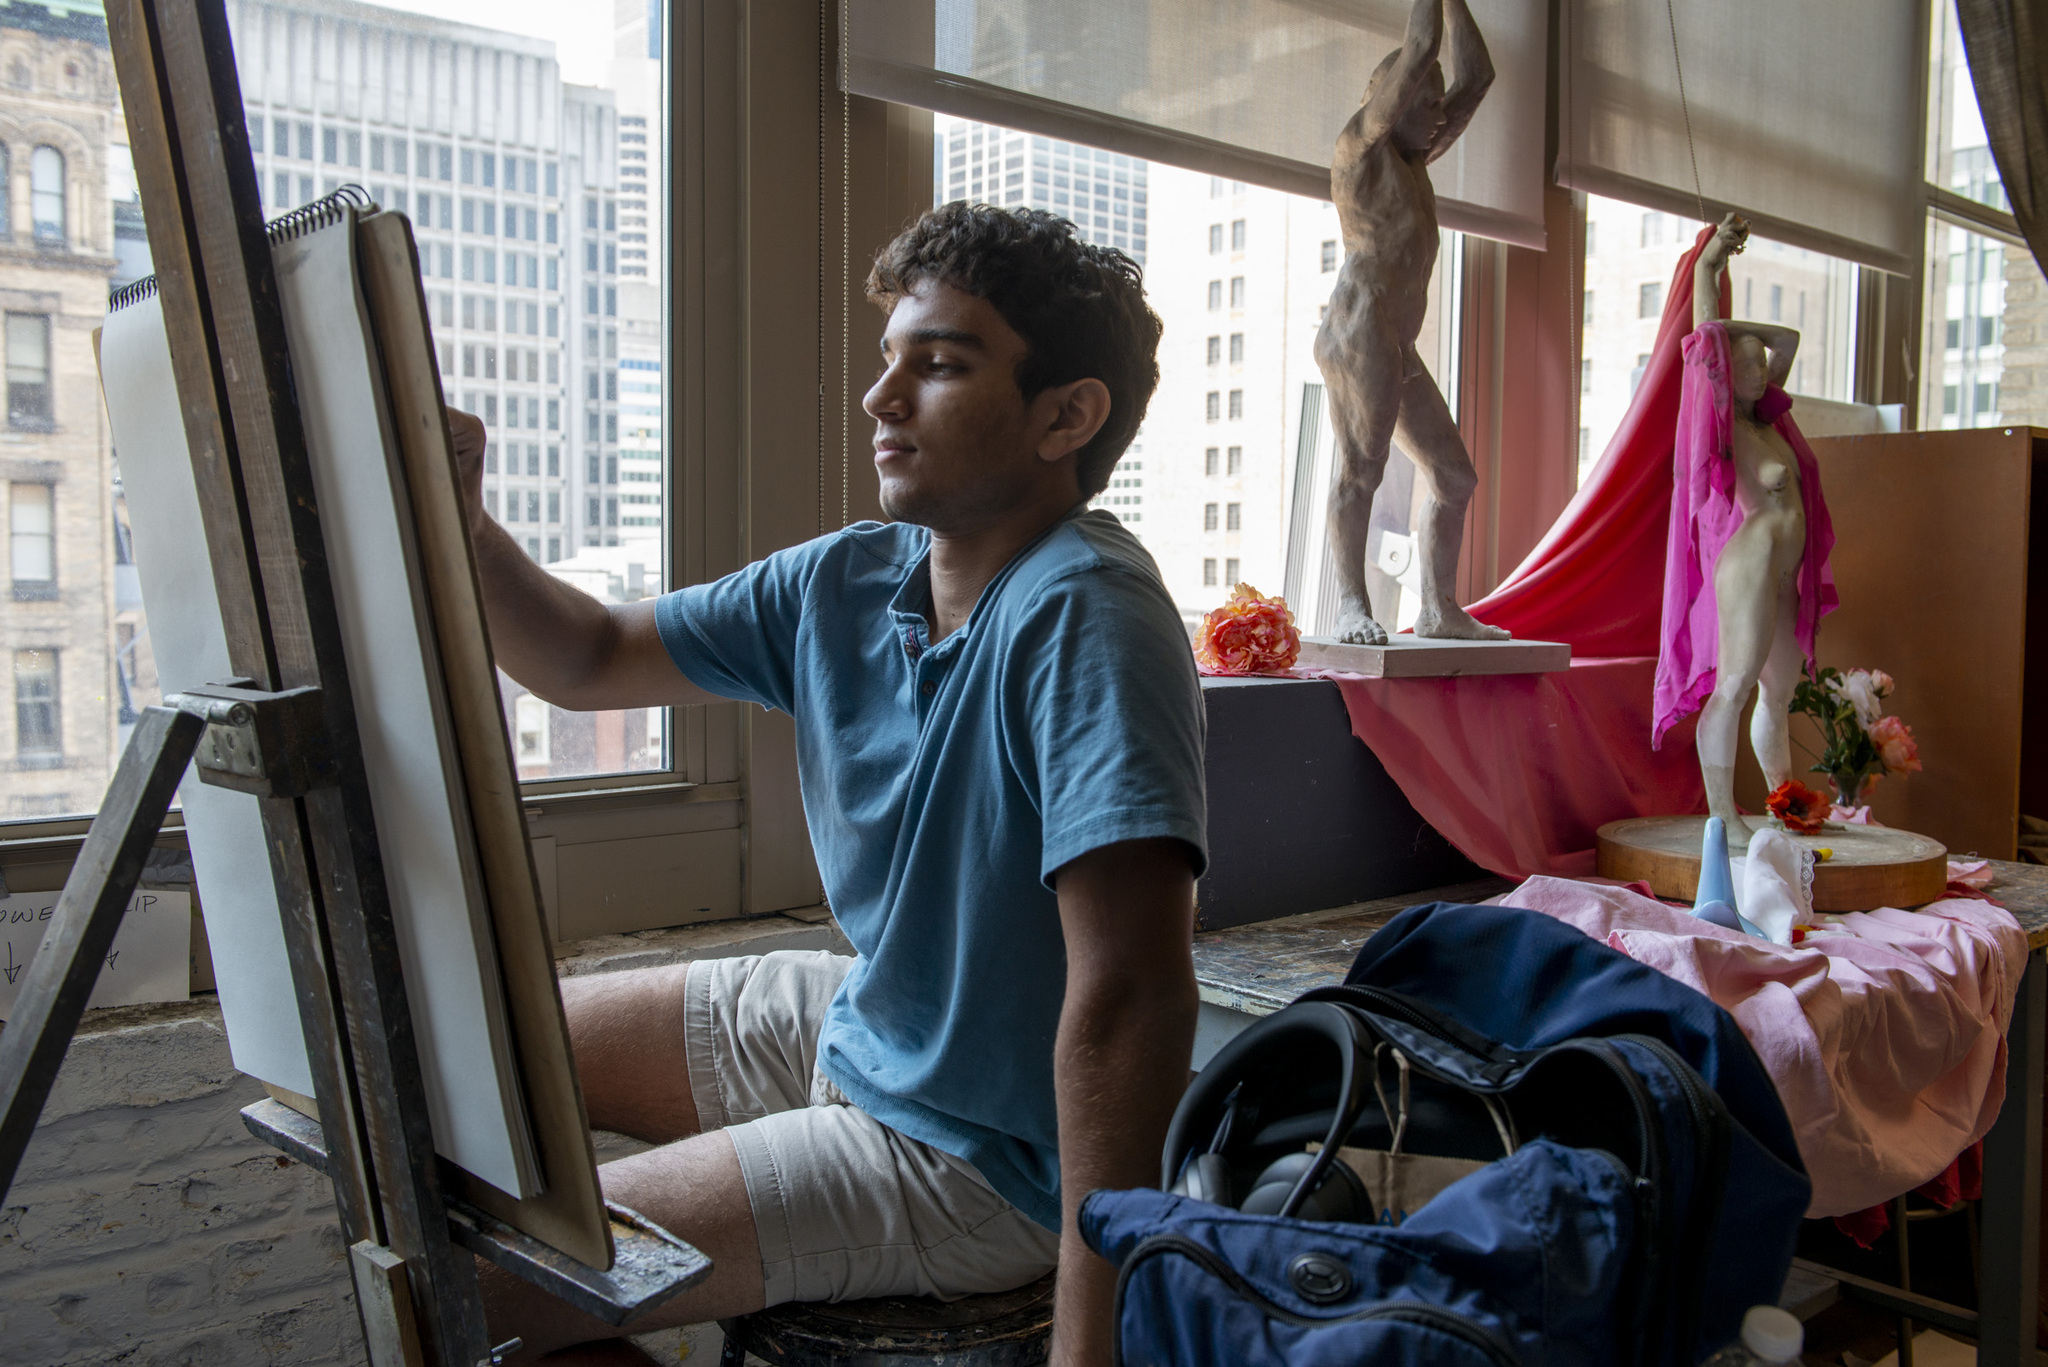 A student in a blue tee shirt reaches up to draw on a pad of paper that leans on an easel. The easel is turned away from the camera. In the background, a table is draped with pink fabric, plaster casts of figures, and other still life objects. Windows behind the table reveal tall buildings outside.